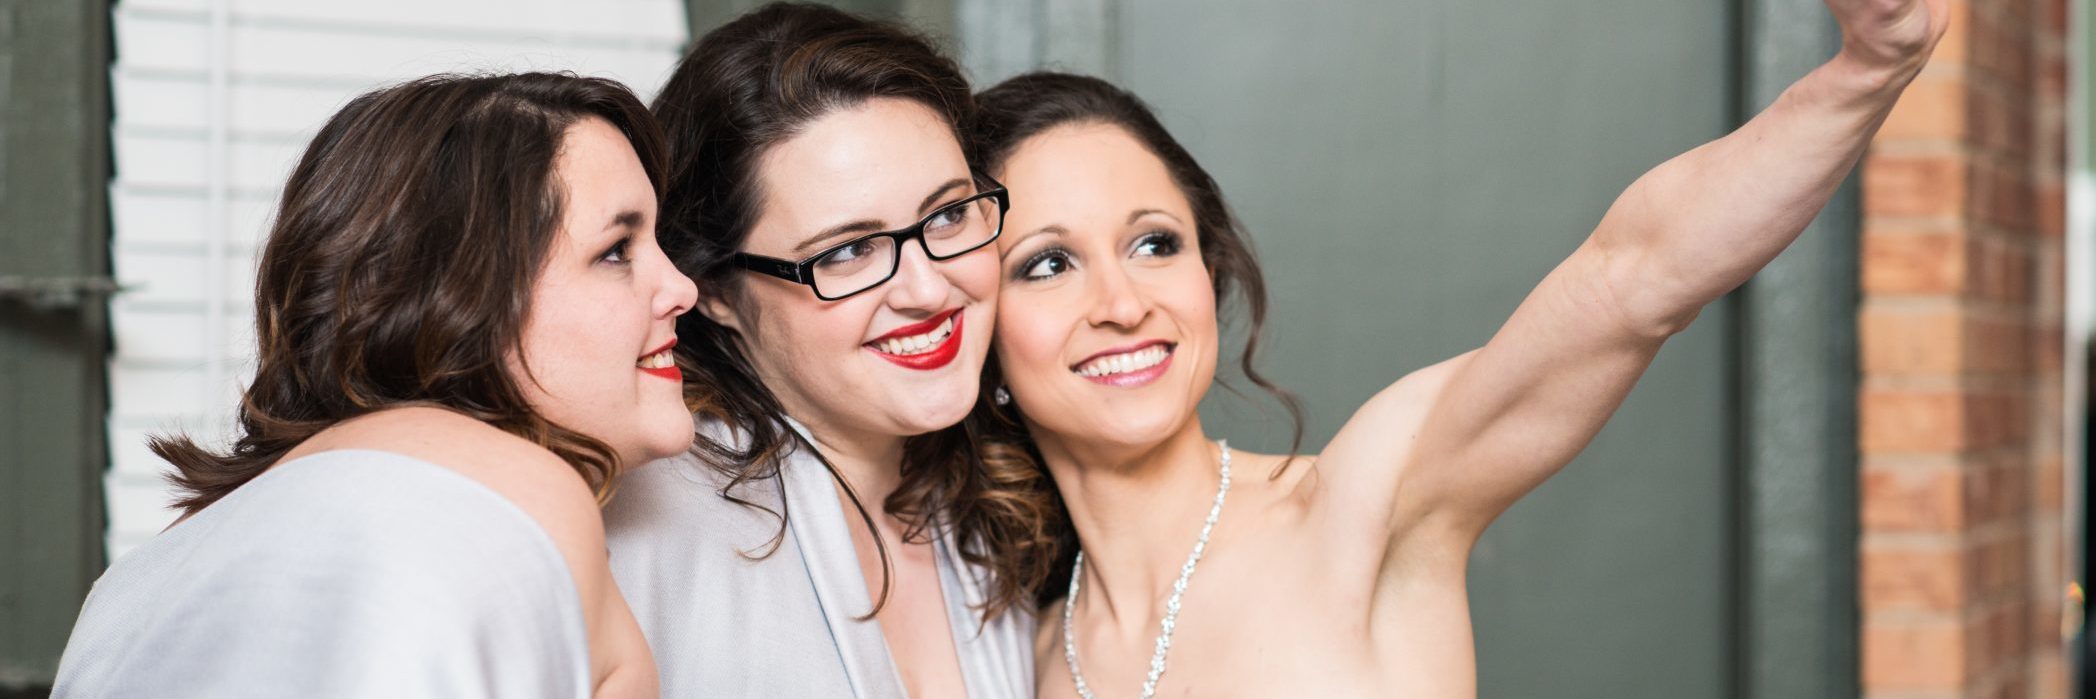 image of three women taking selfie and smiling, one wearing a wedding dress